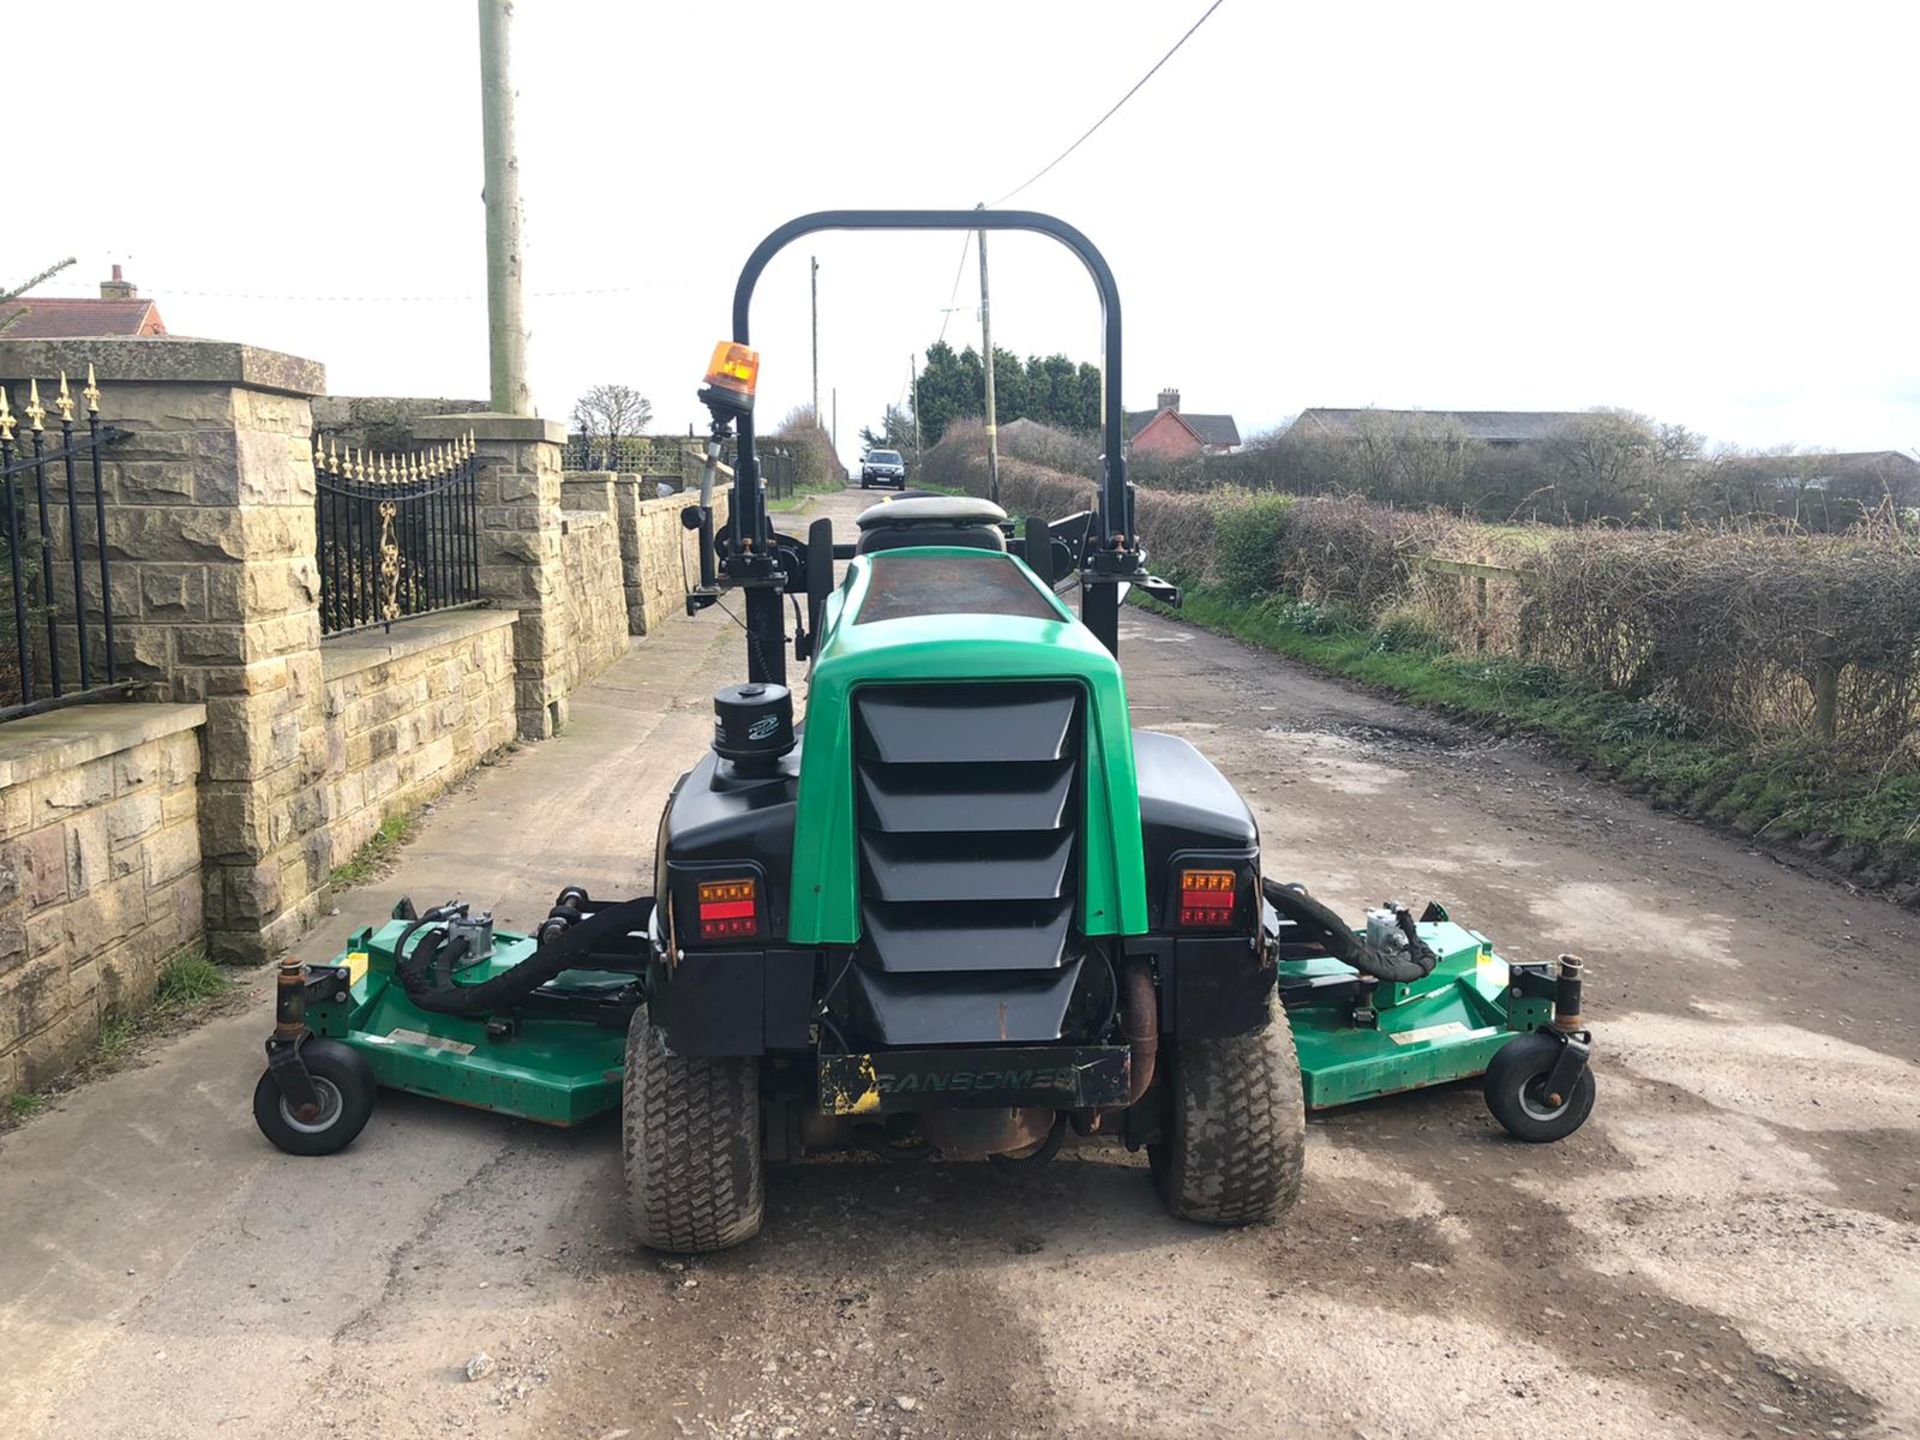 RANSOMES HR6010 BATWING RIDE ON LAWN MOWER, YEAR 2013/62 PLATE, 4 WHEEL DRIVE *PLUS VAT* - Image 5 of 5